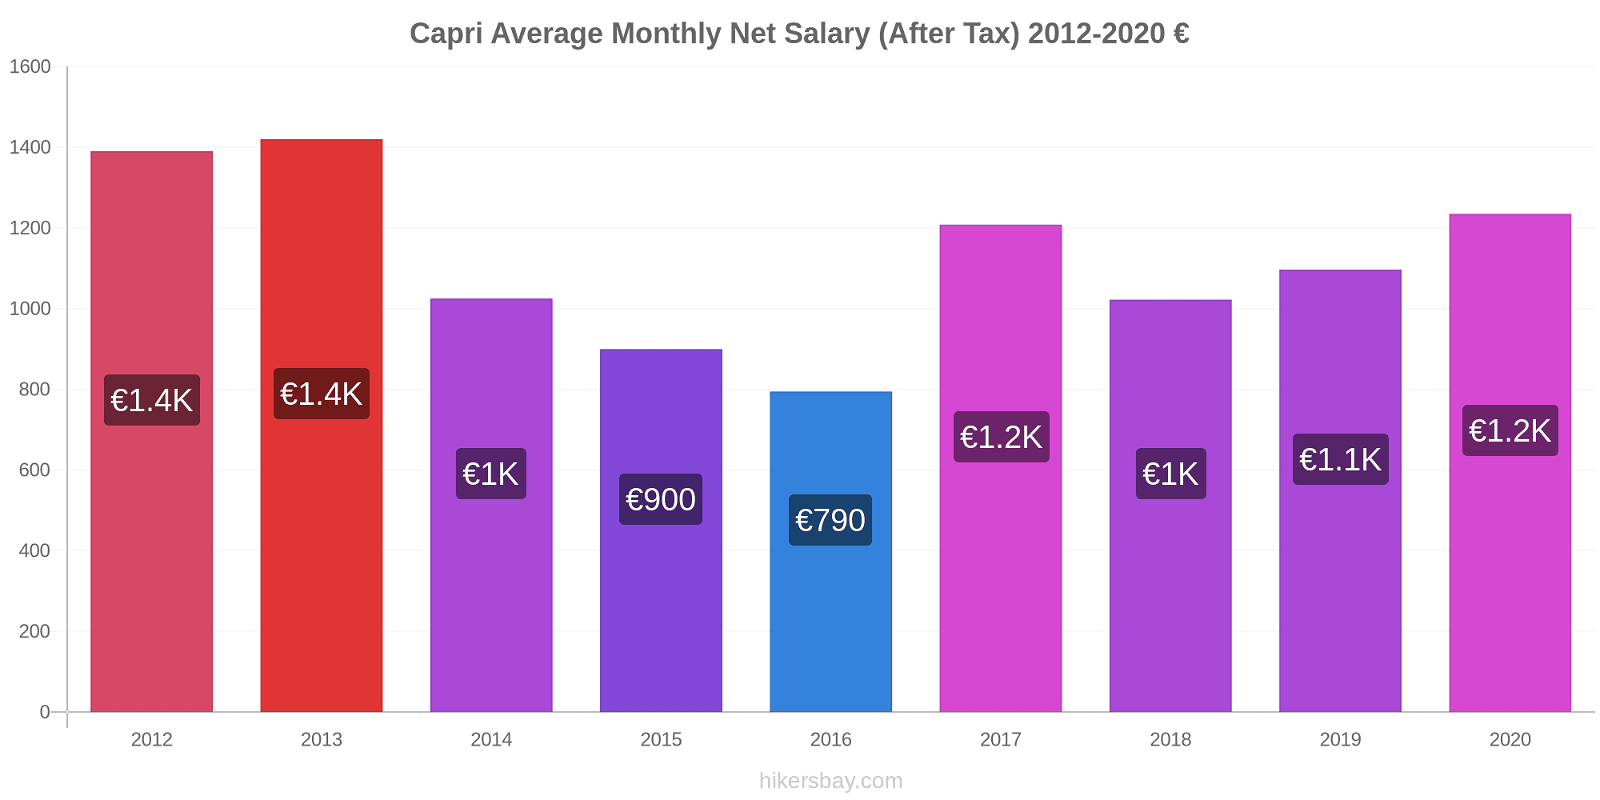 Capri price changes Average Monthly Net Salary (After Tax) hikersbay.com